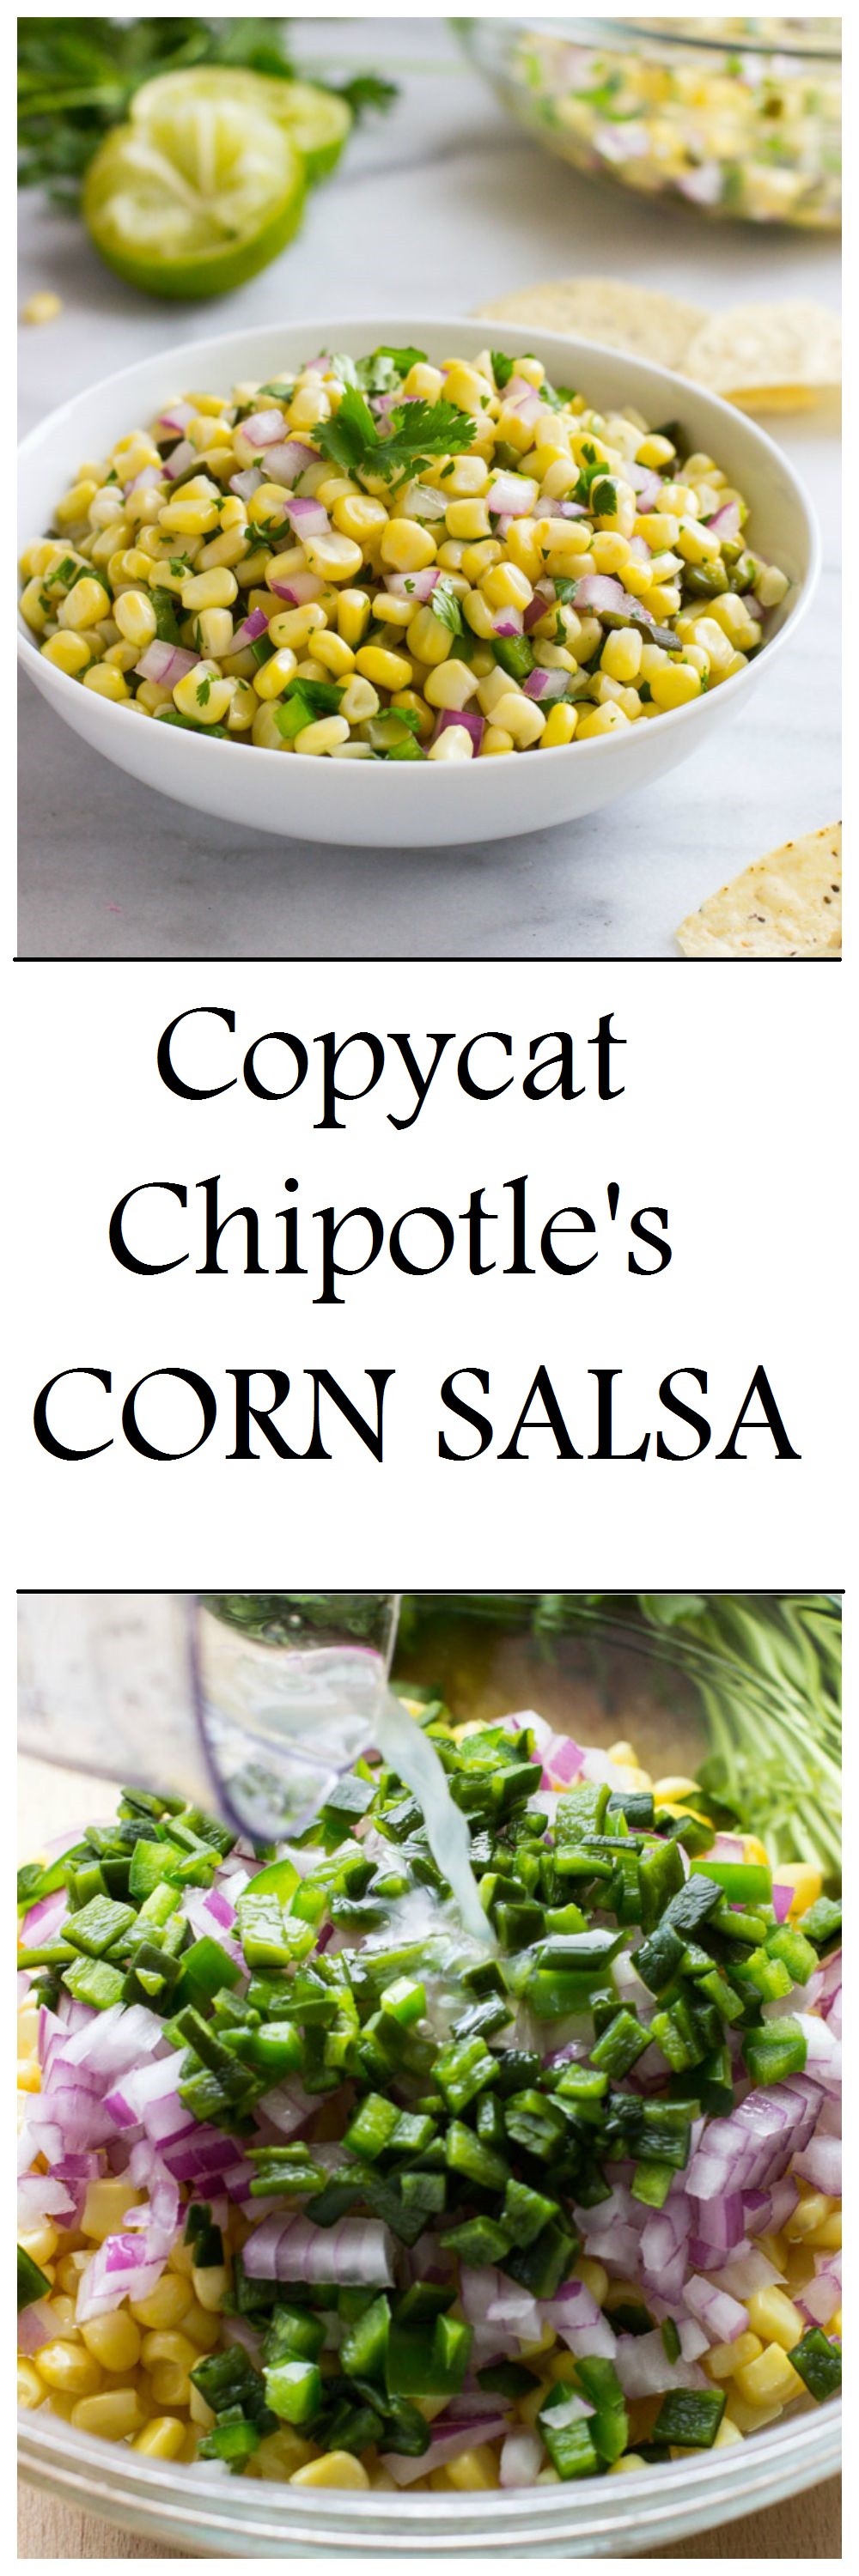 Copycat Chipotle's Corn Salsa- two key ingredients give this salsa it's irresistible flavor!